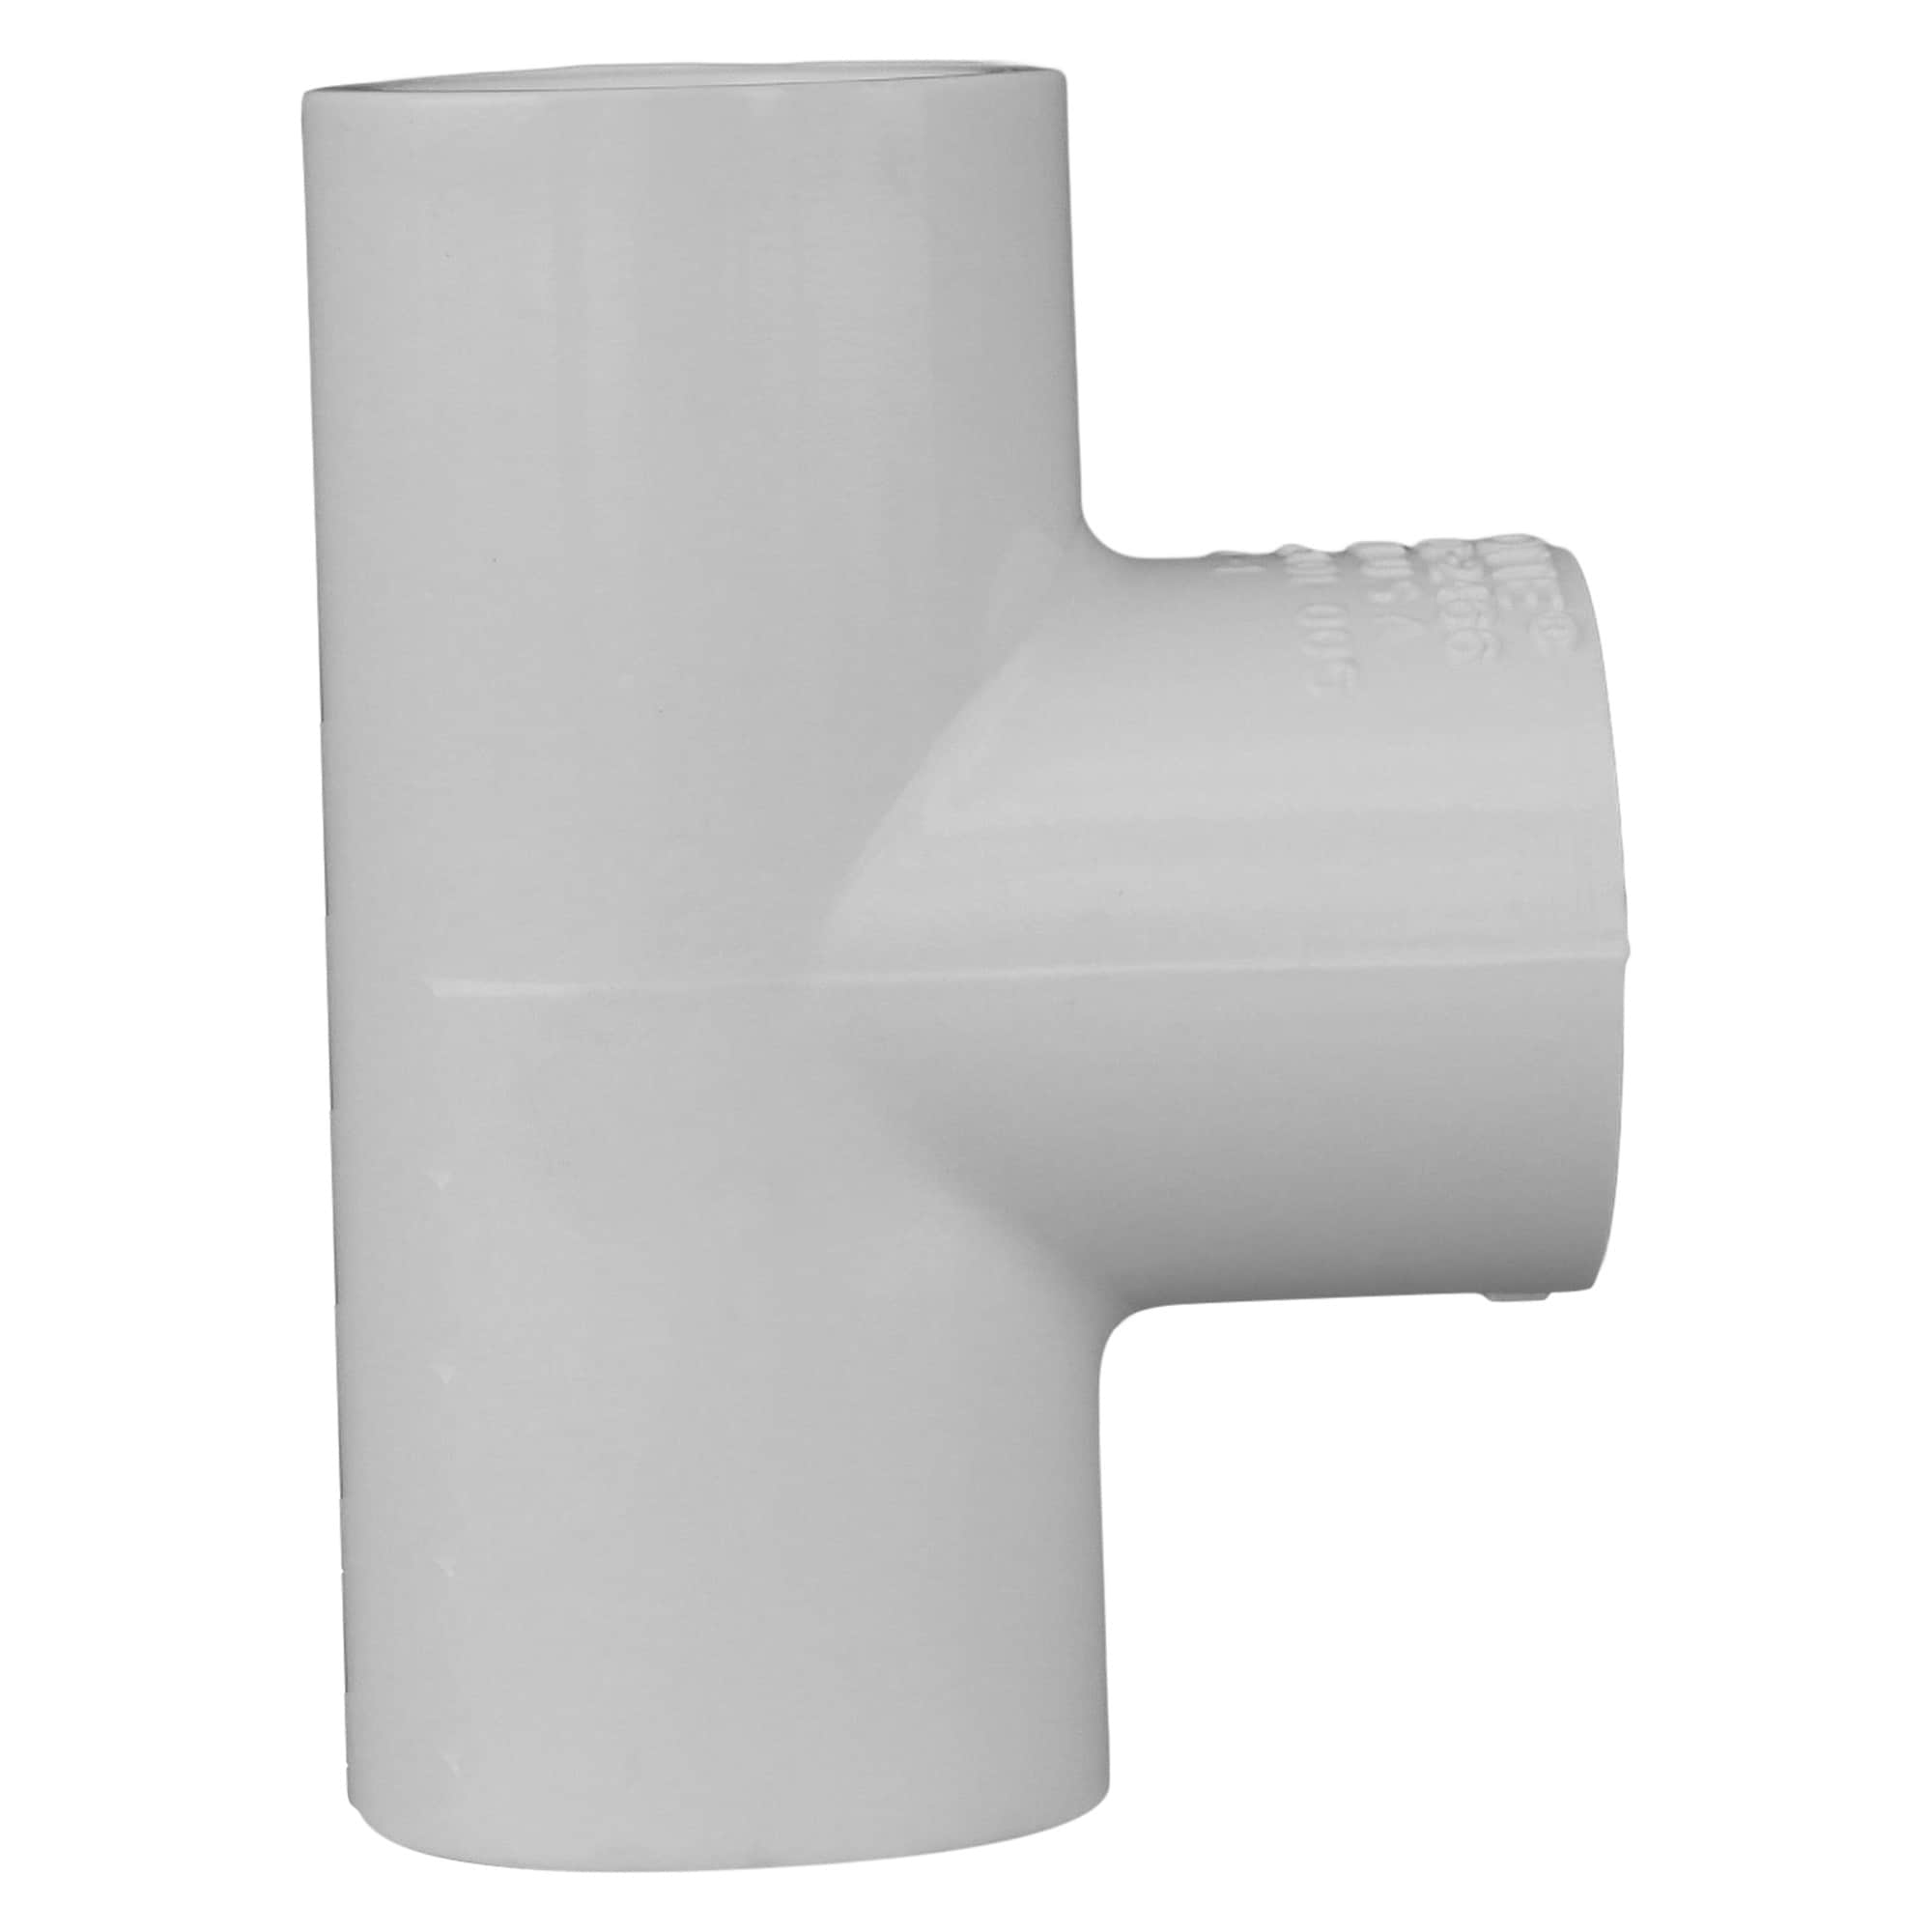 Charlotte Pipe 1 2 In 850 Psi Schedule 40 White Tee Pvc Tee 10 Pack In The Pvc Pipe Fittings Department At Lowes Com